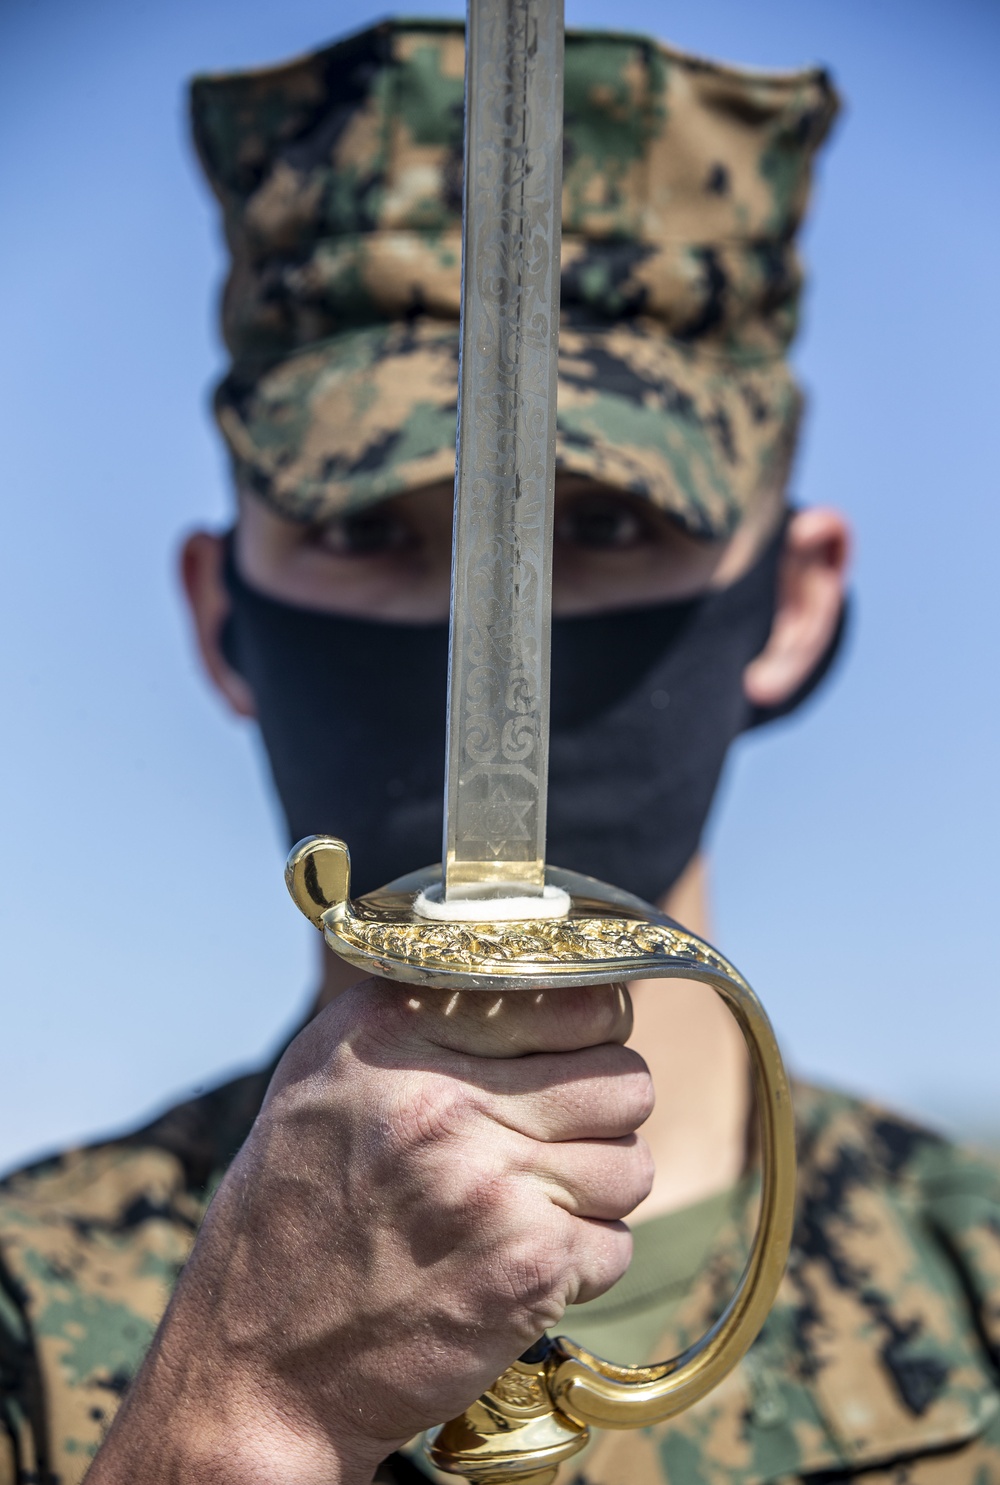 Corporals Course conducts sword manual